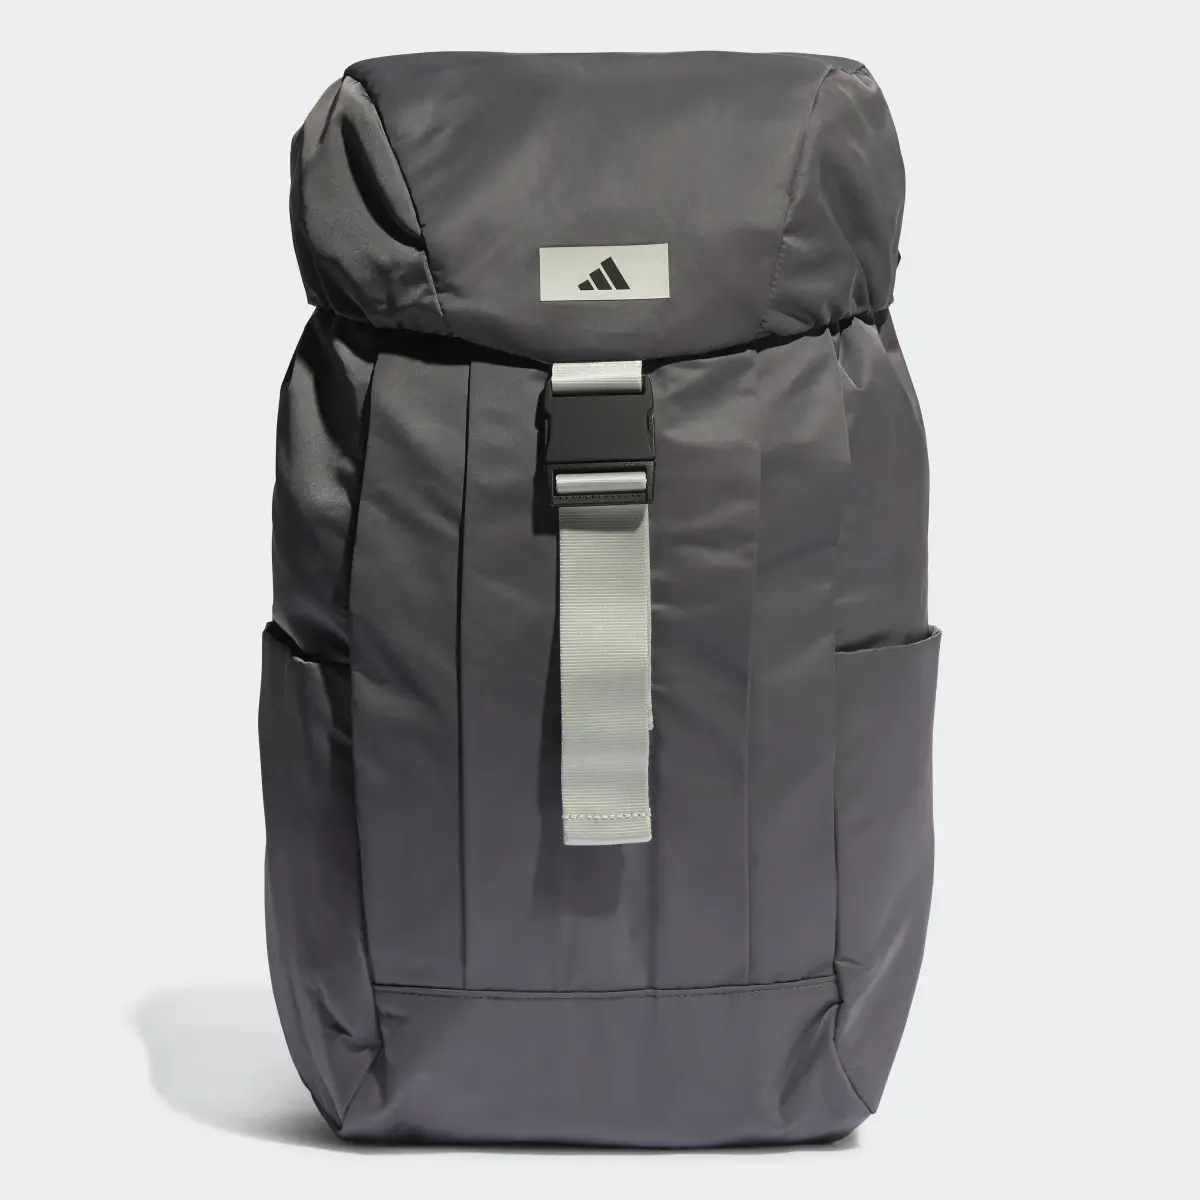 Adidas Gym High-Intensity Backpack. 2